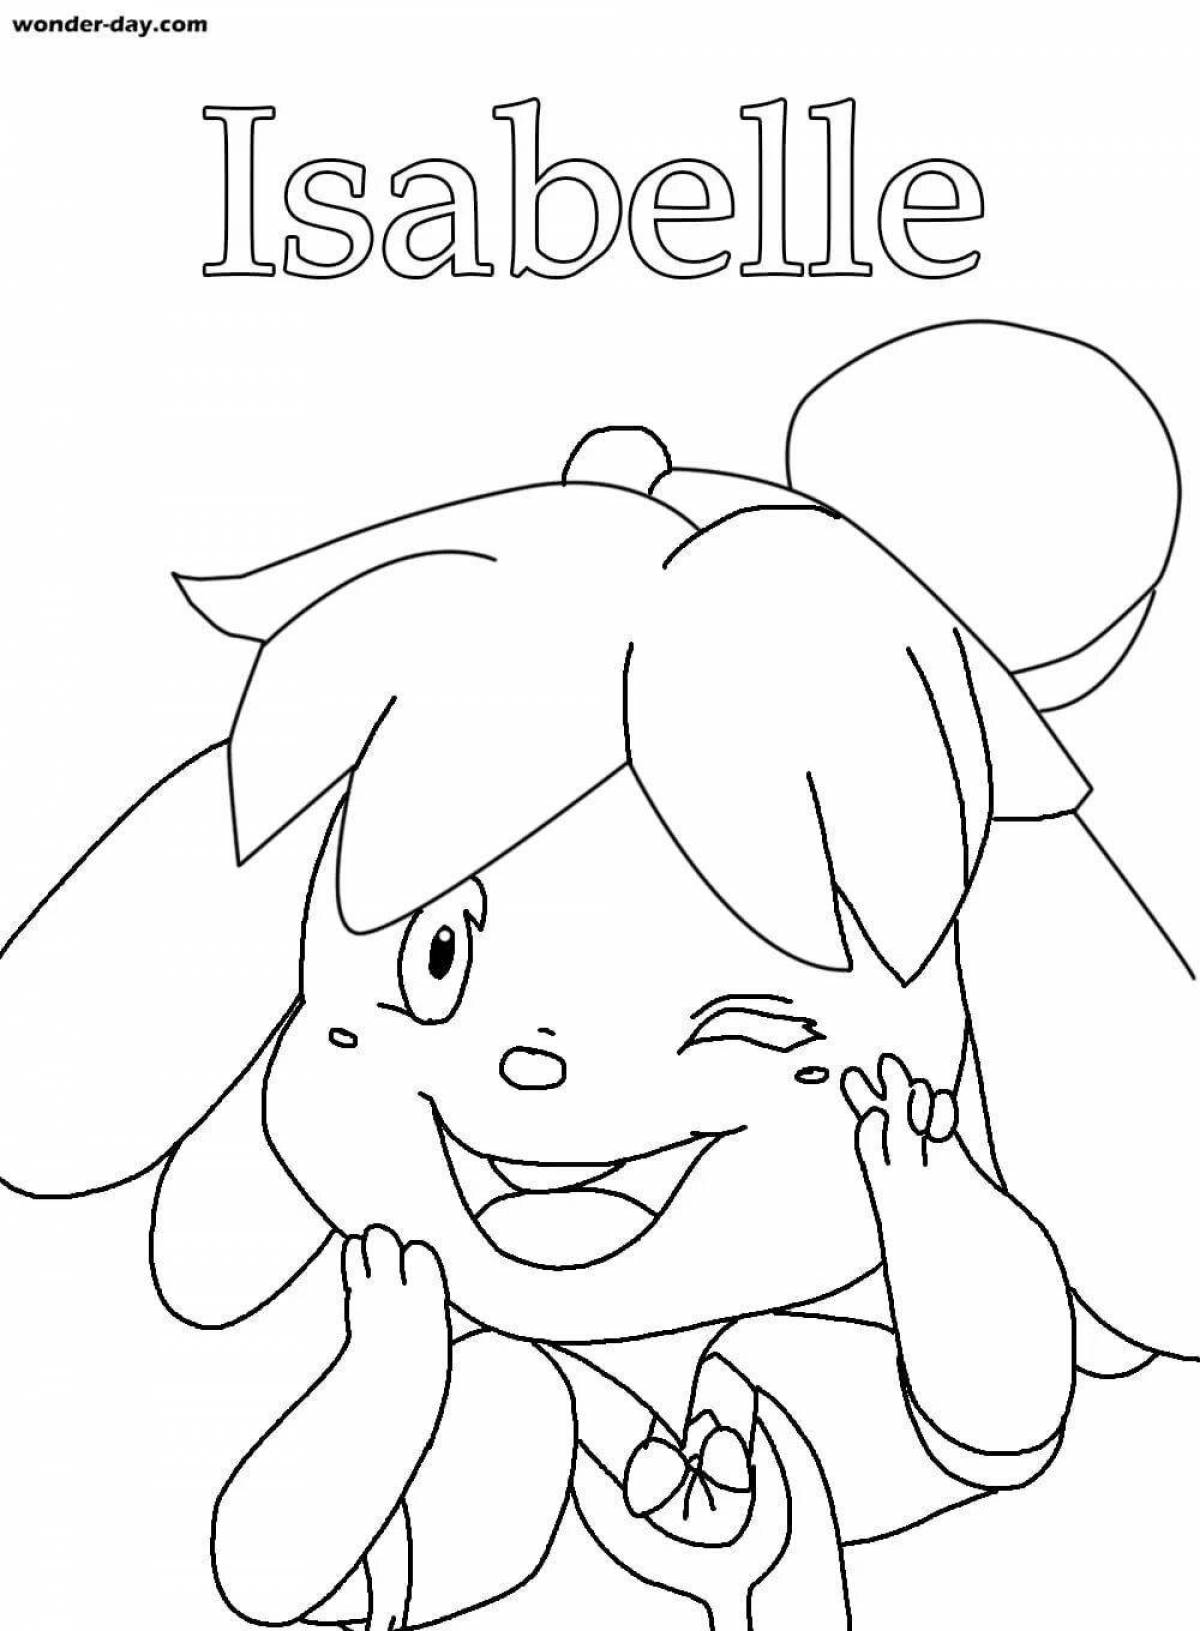 Glowing Miracle Day coloring page